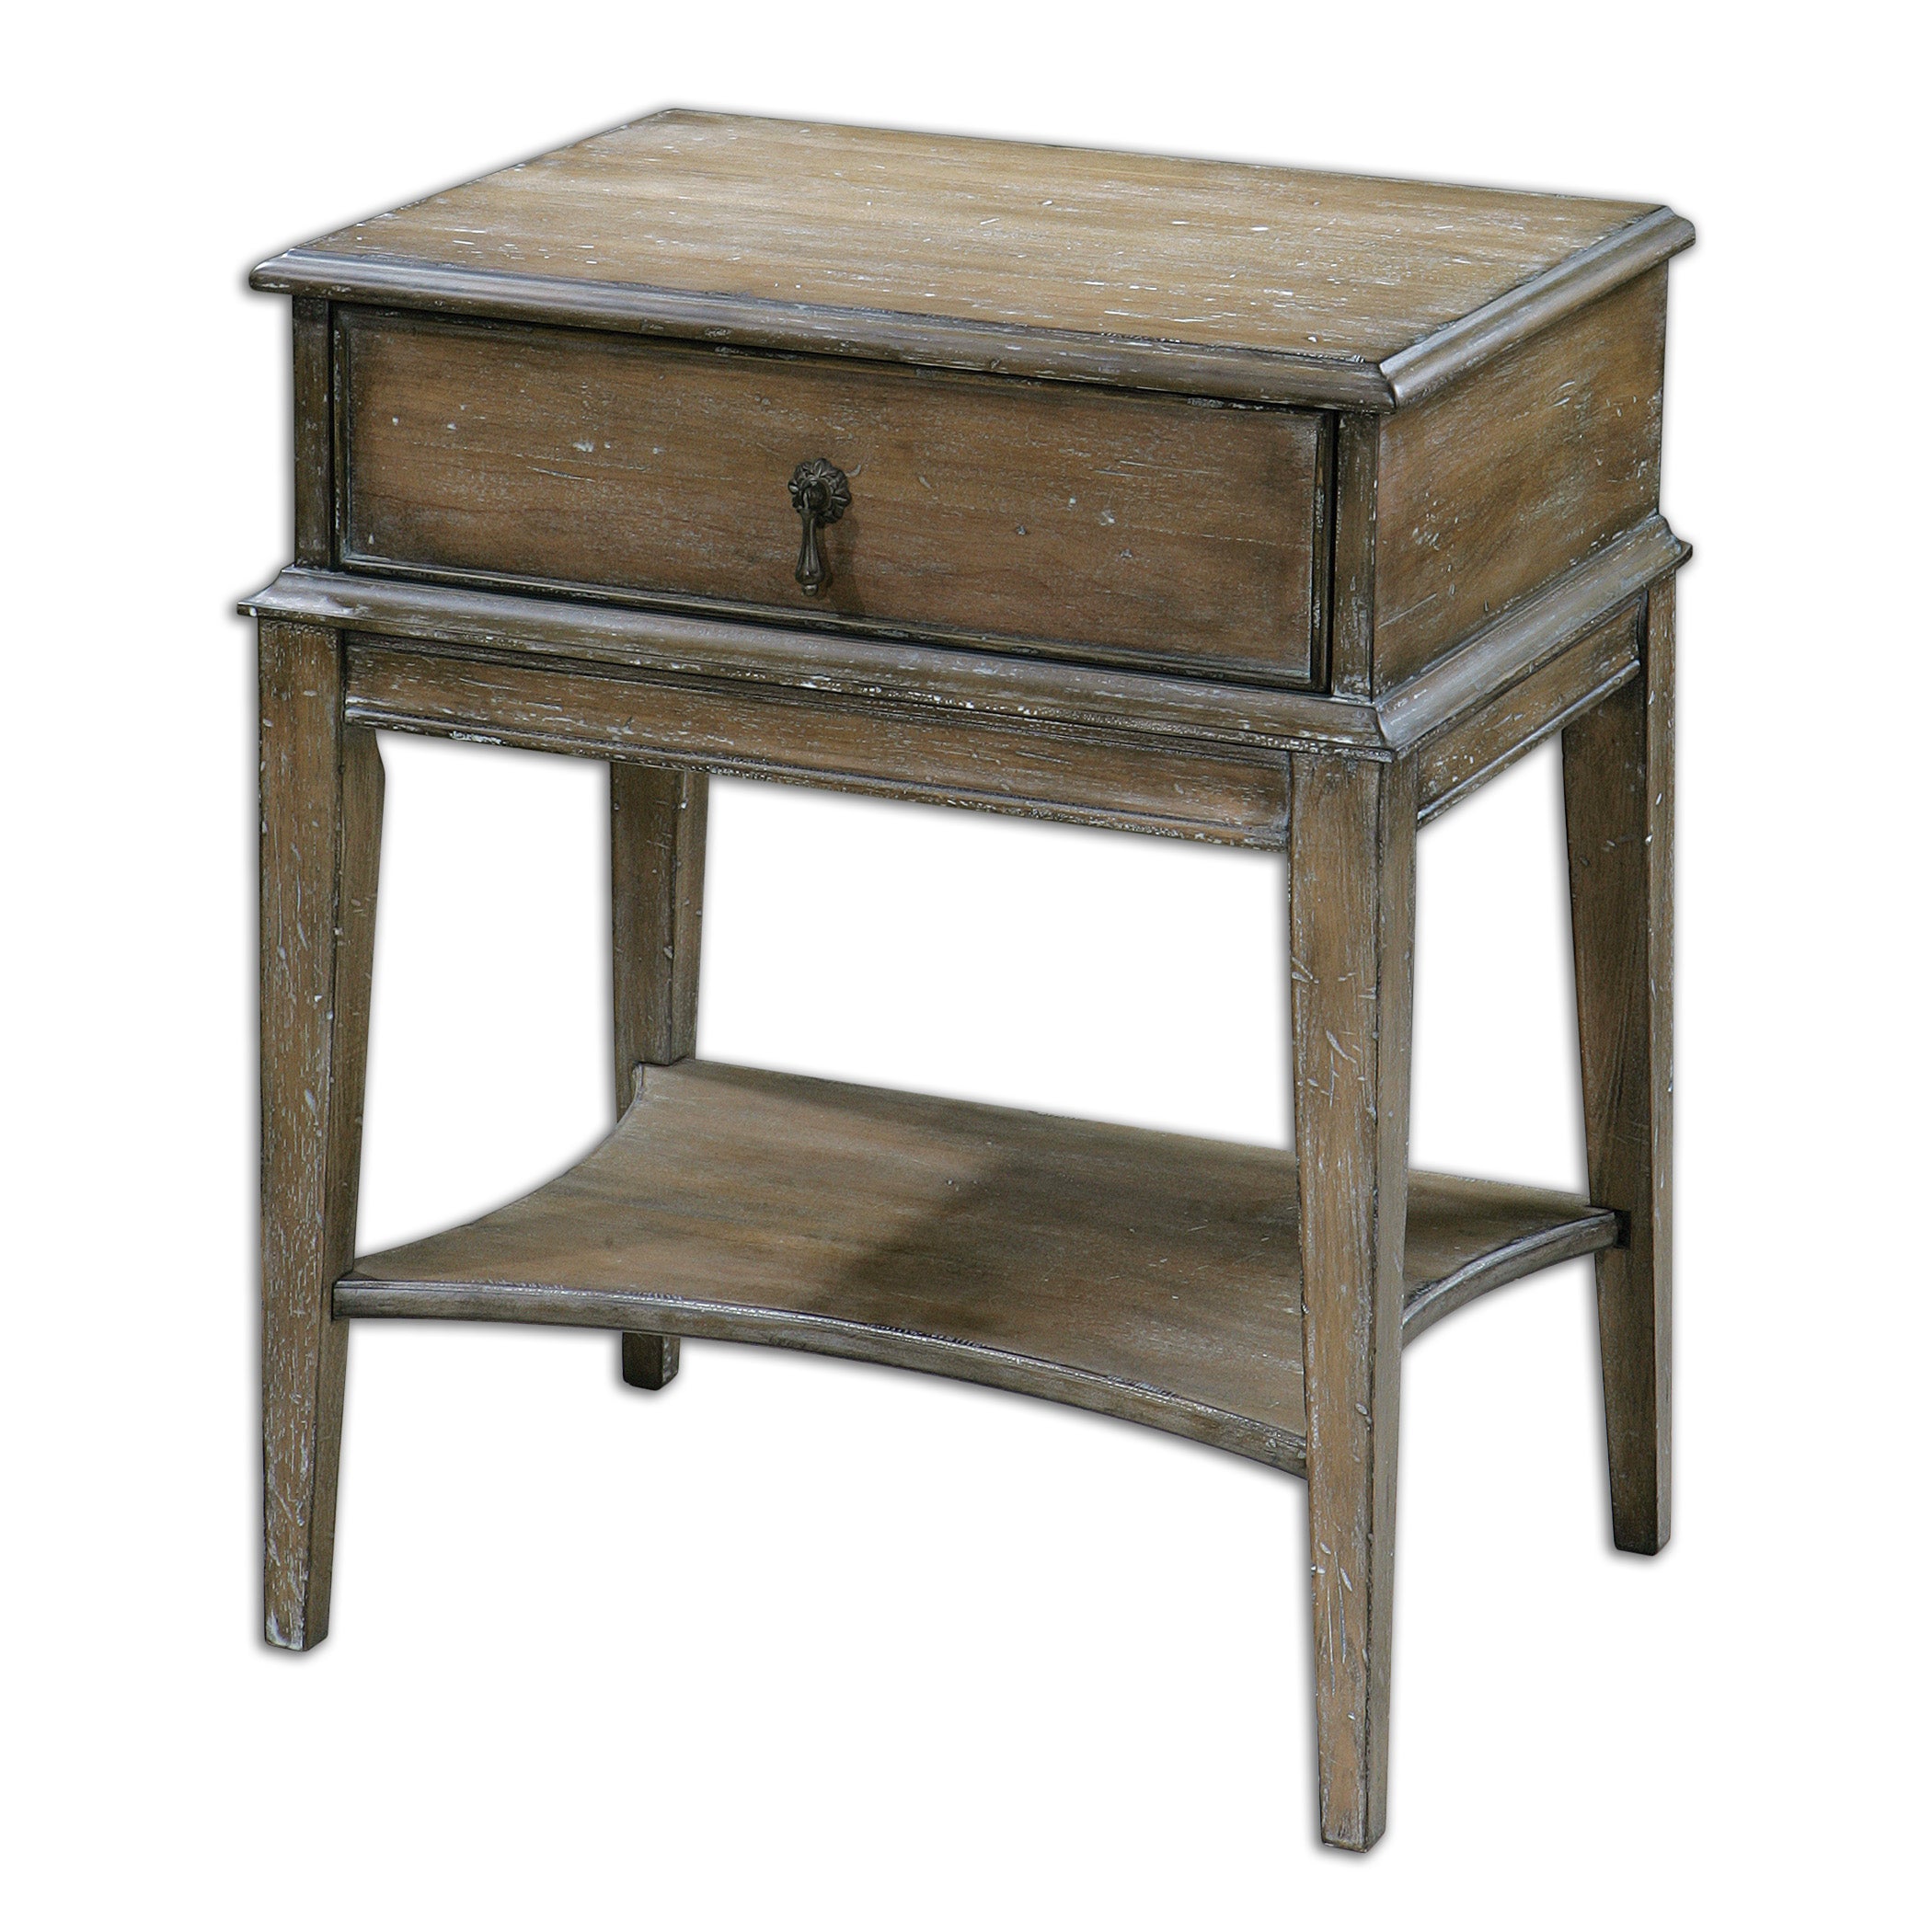 Uttermost Hanford Accent & End Tables Accent & End Tables Uttermost   